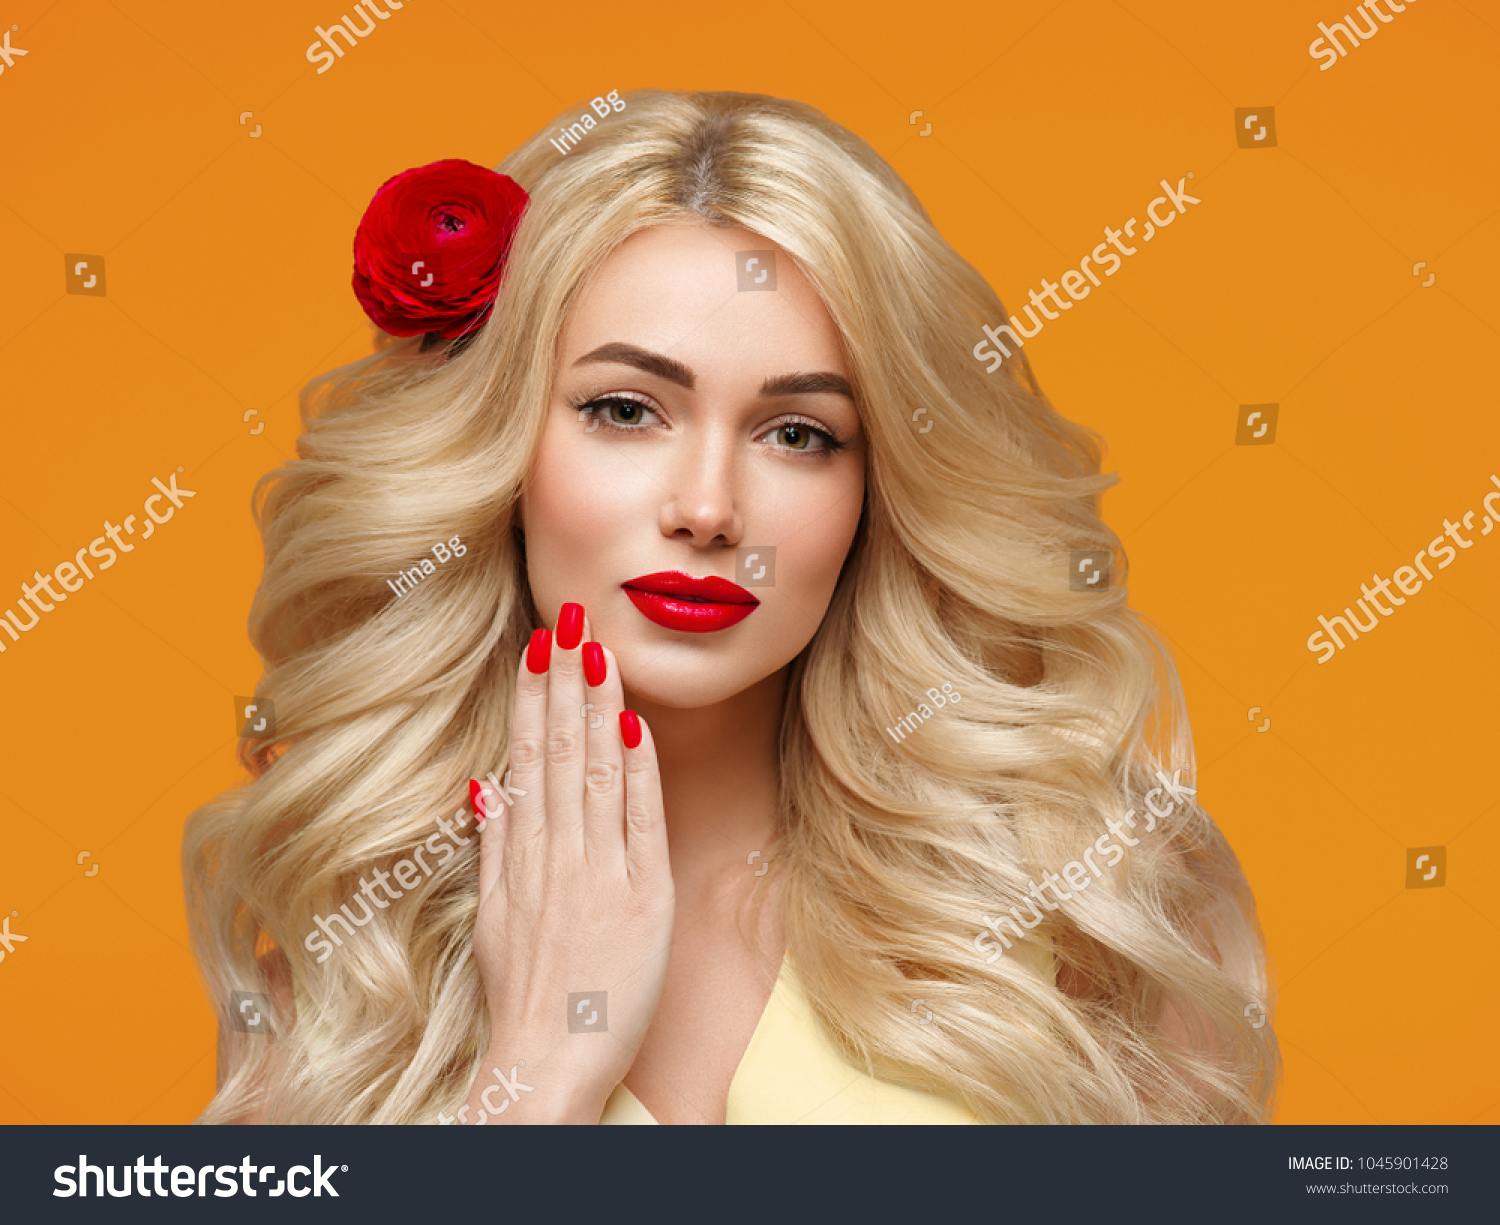 Blonde Hair Woman Manicure Red Nails Stock Photo Edit Now 1045901428